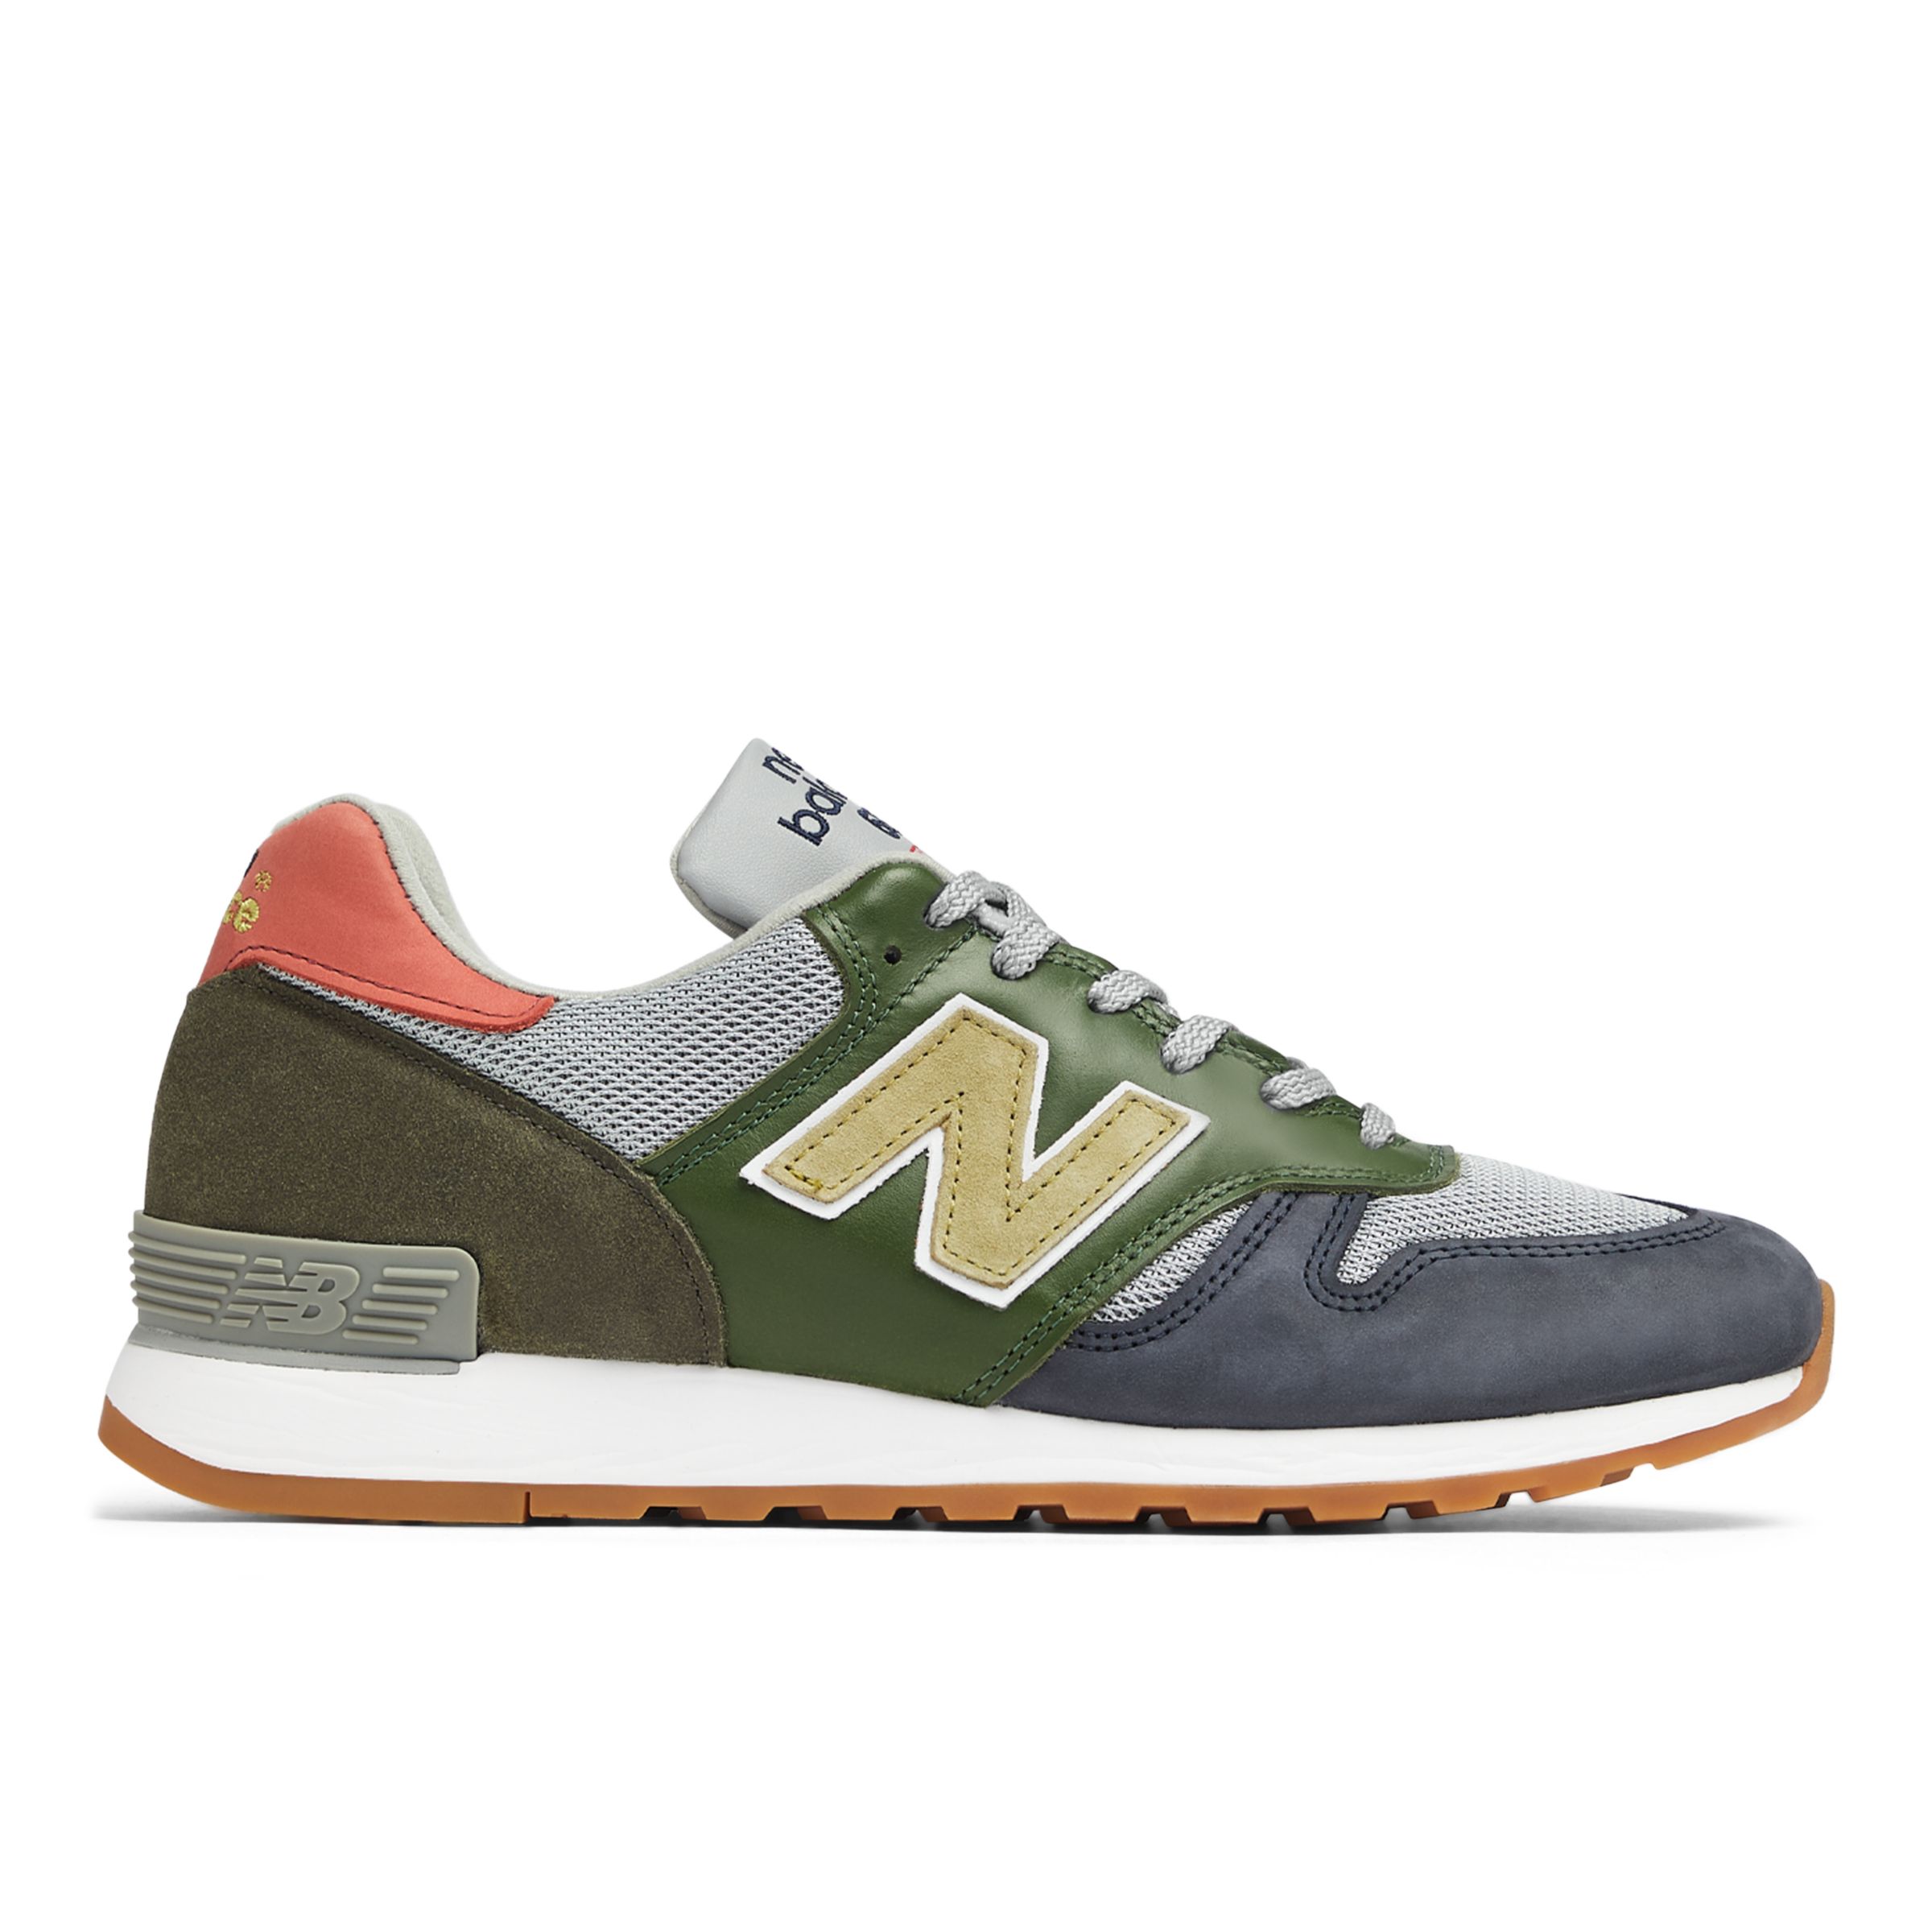 Made in UK 670 - New Balance